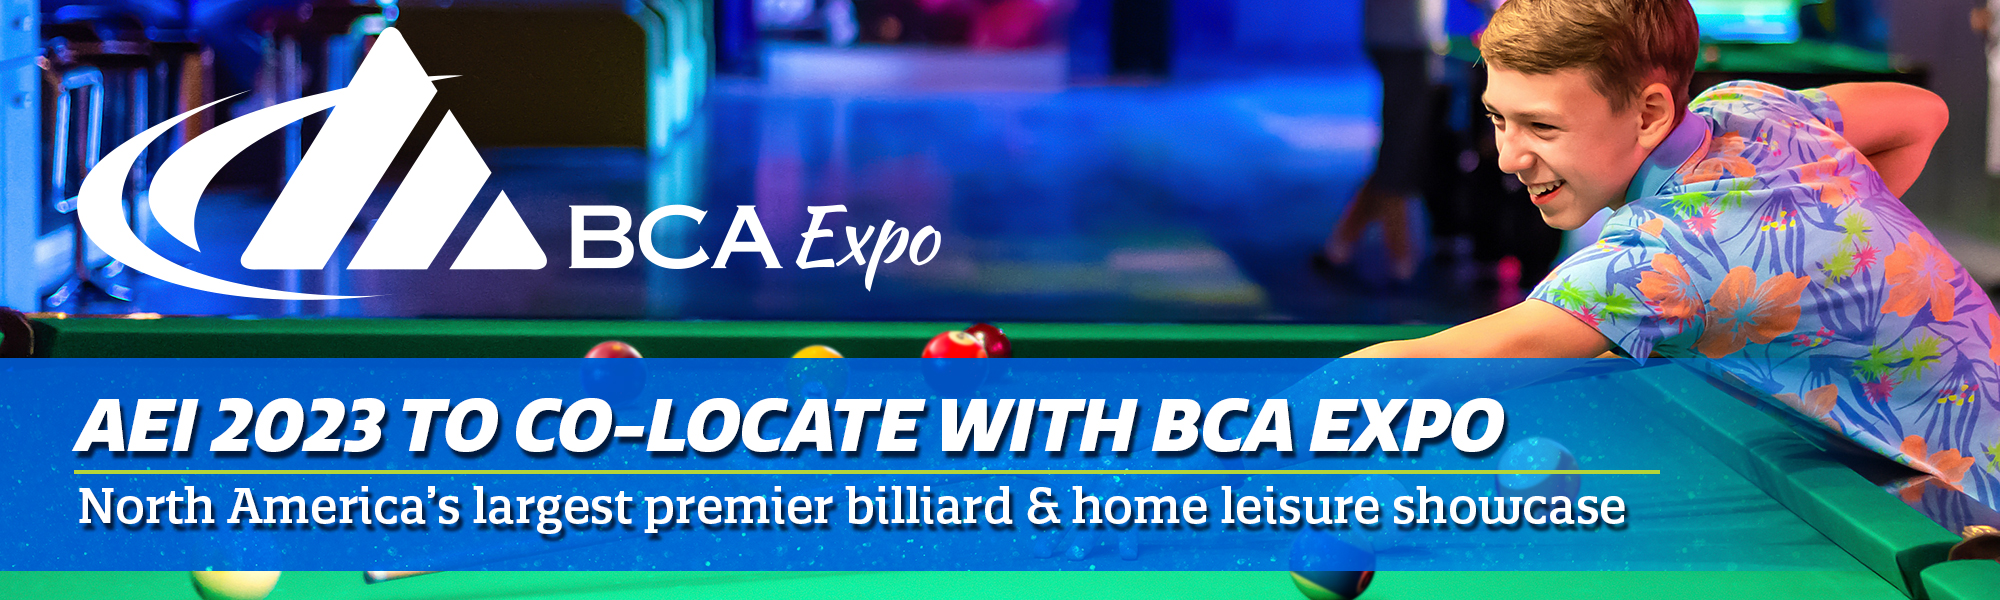 AEI to Co-Locate with BCA Expo